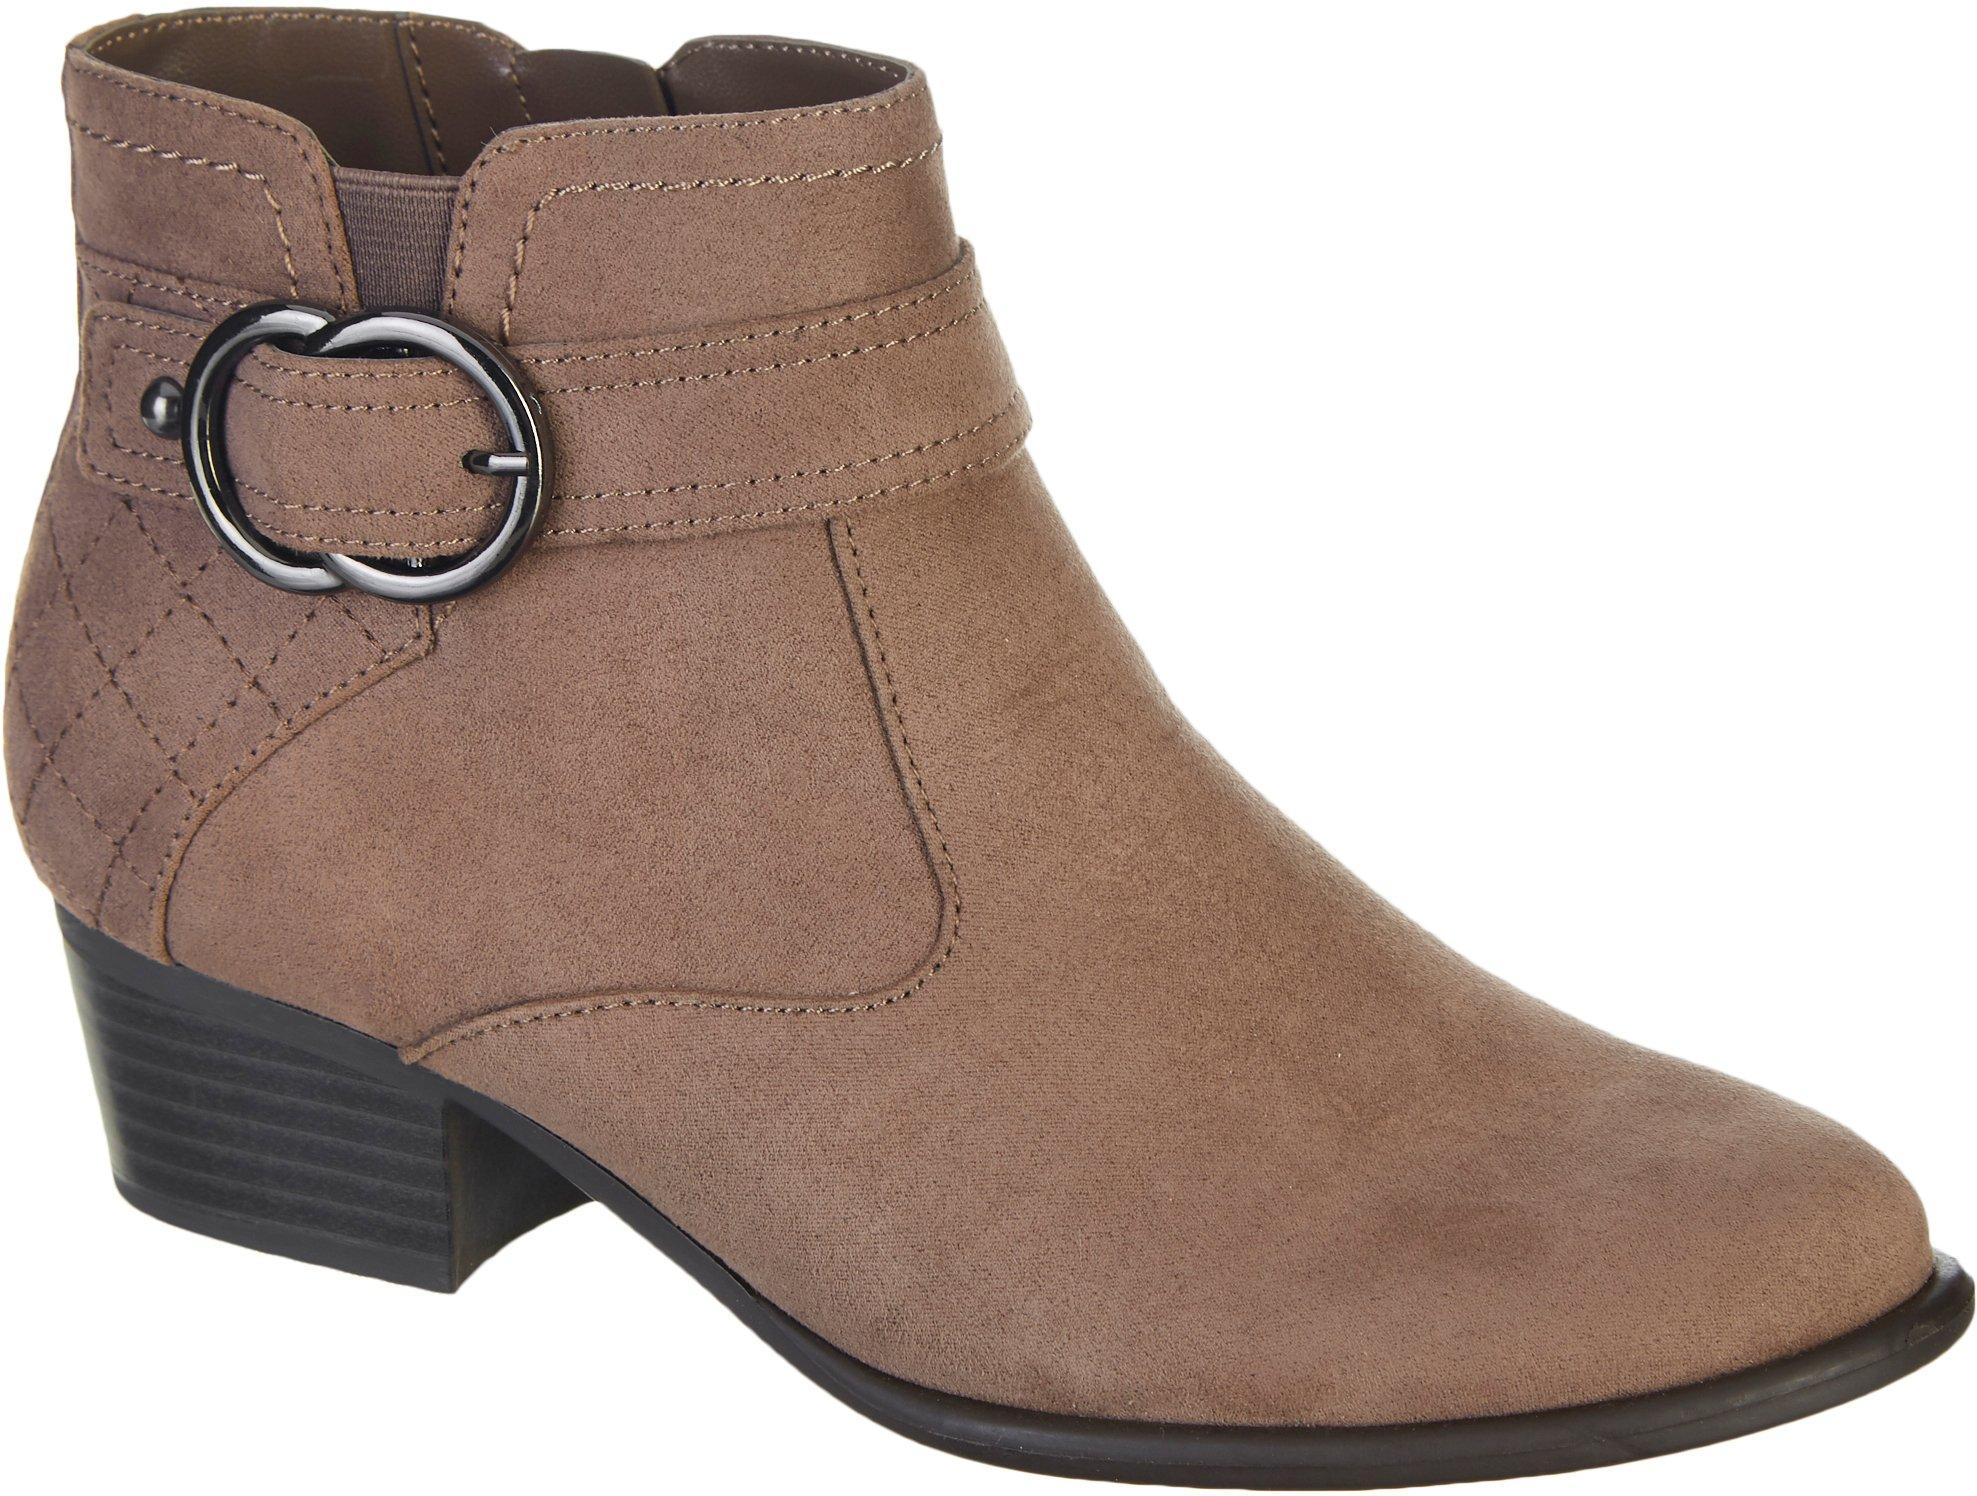 Ankle Boots | Bealls Florida